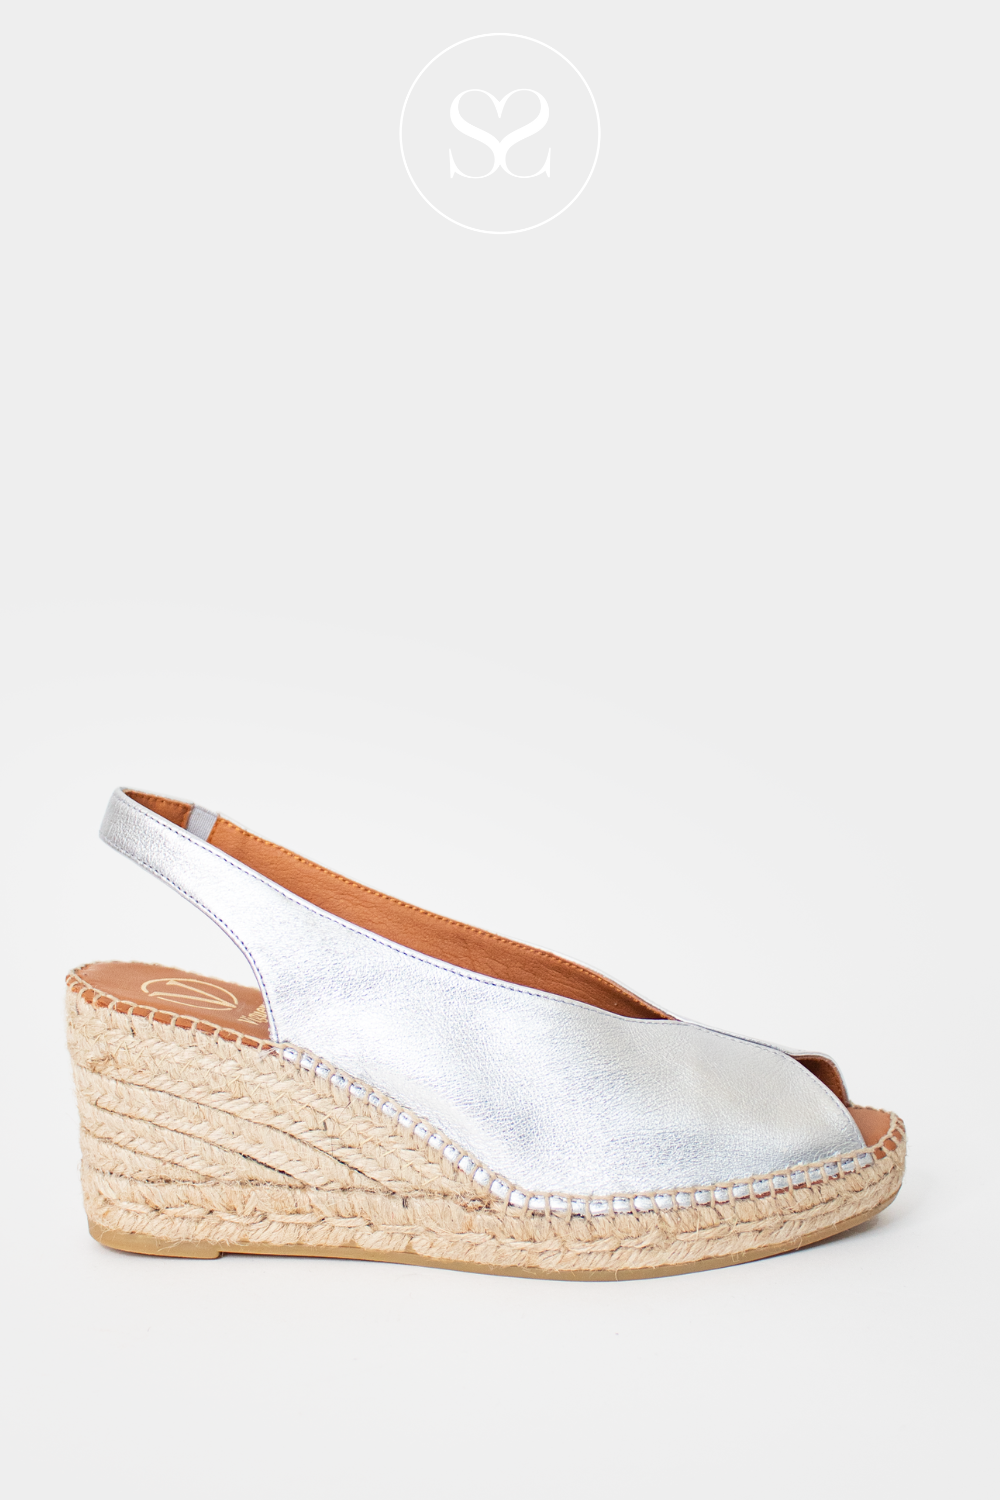 VIGUERA 2127 SILVER WEDGE ESPADRILLE SANDALS WITH PEEP TOE FRONT AND SLINGBACK HEEL